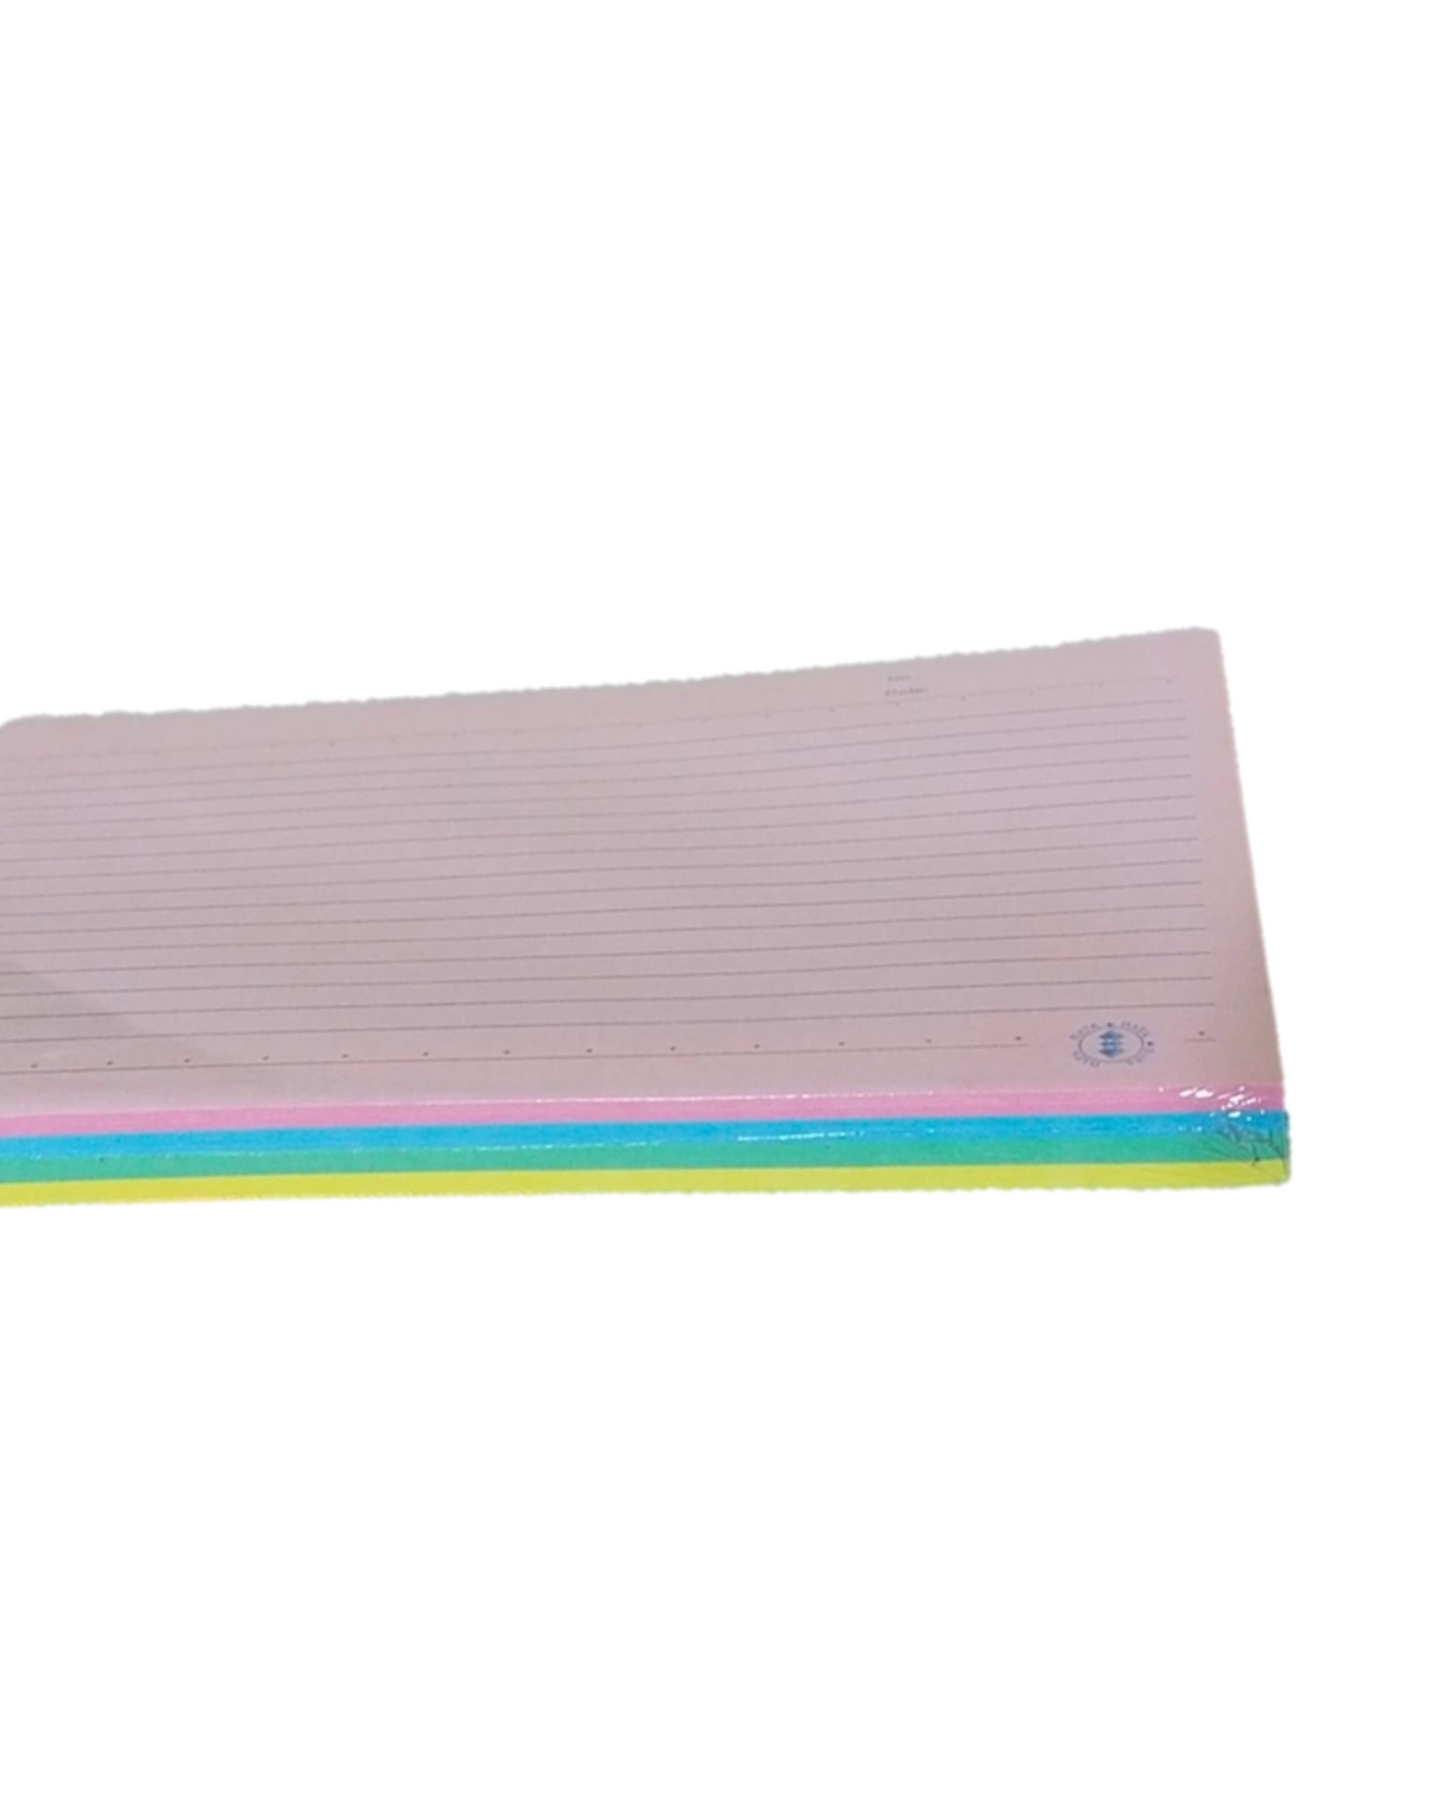 Data Colored Index Card 5x8in (100pcs)